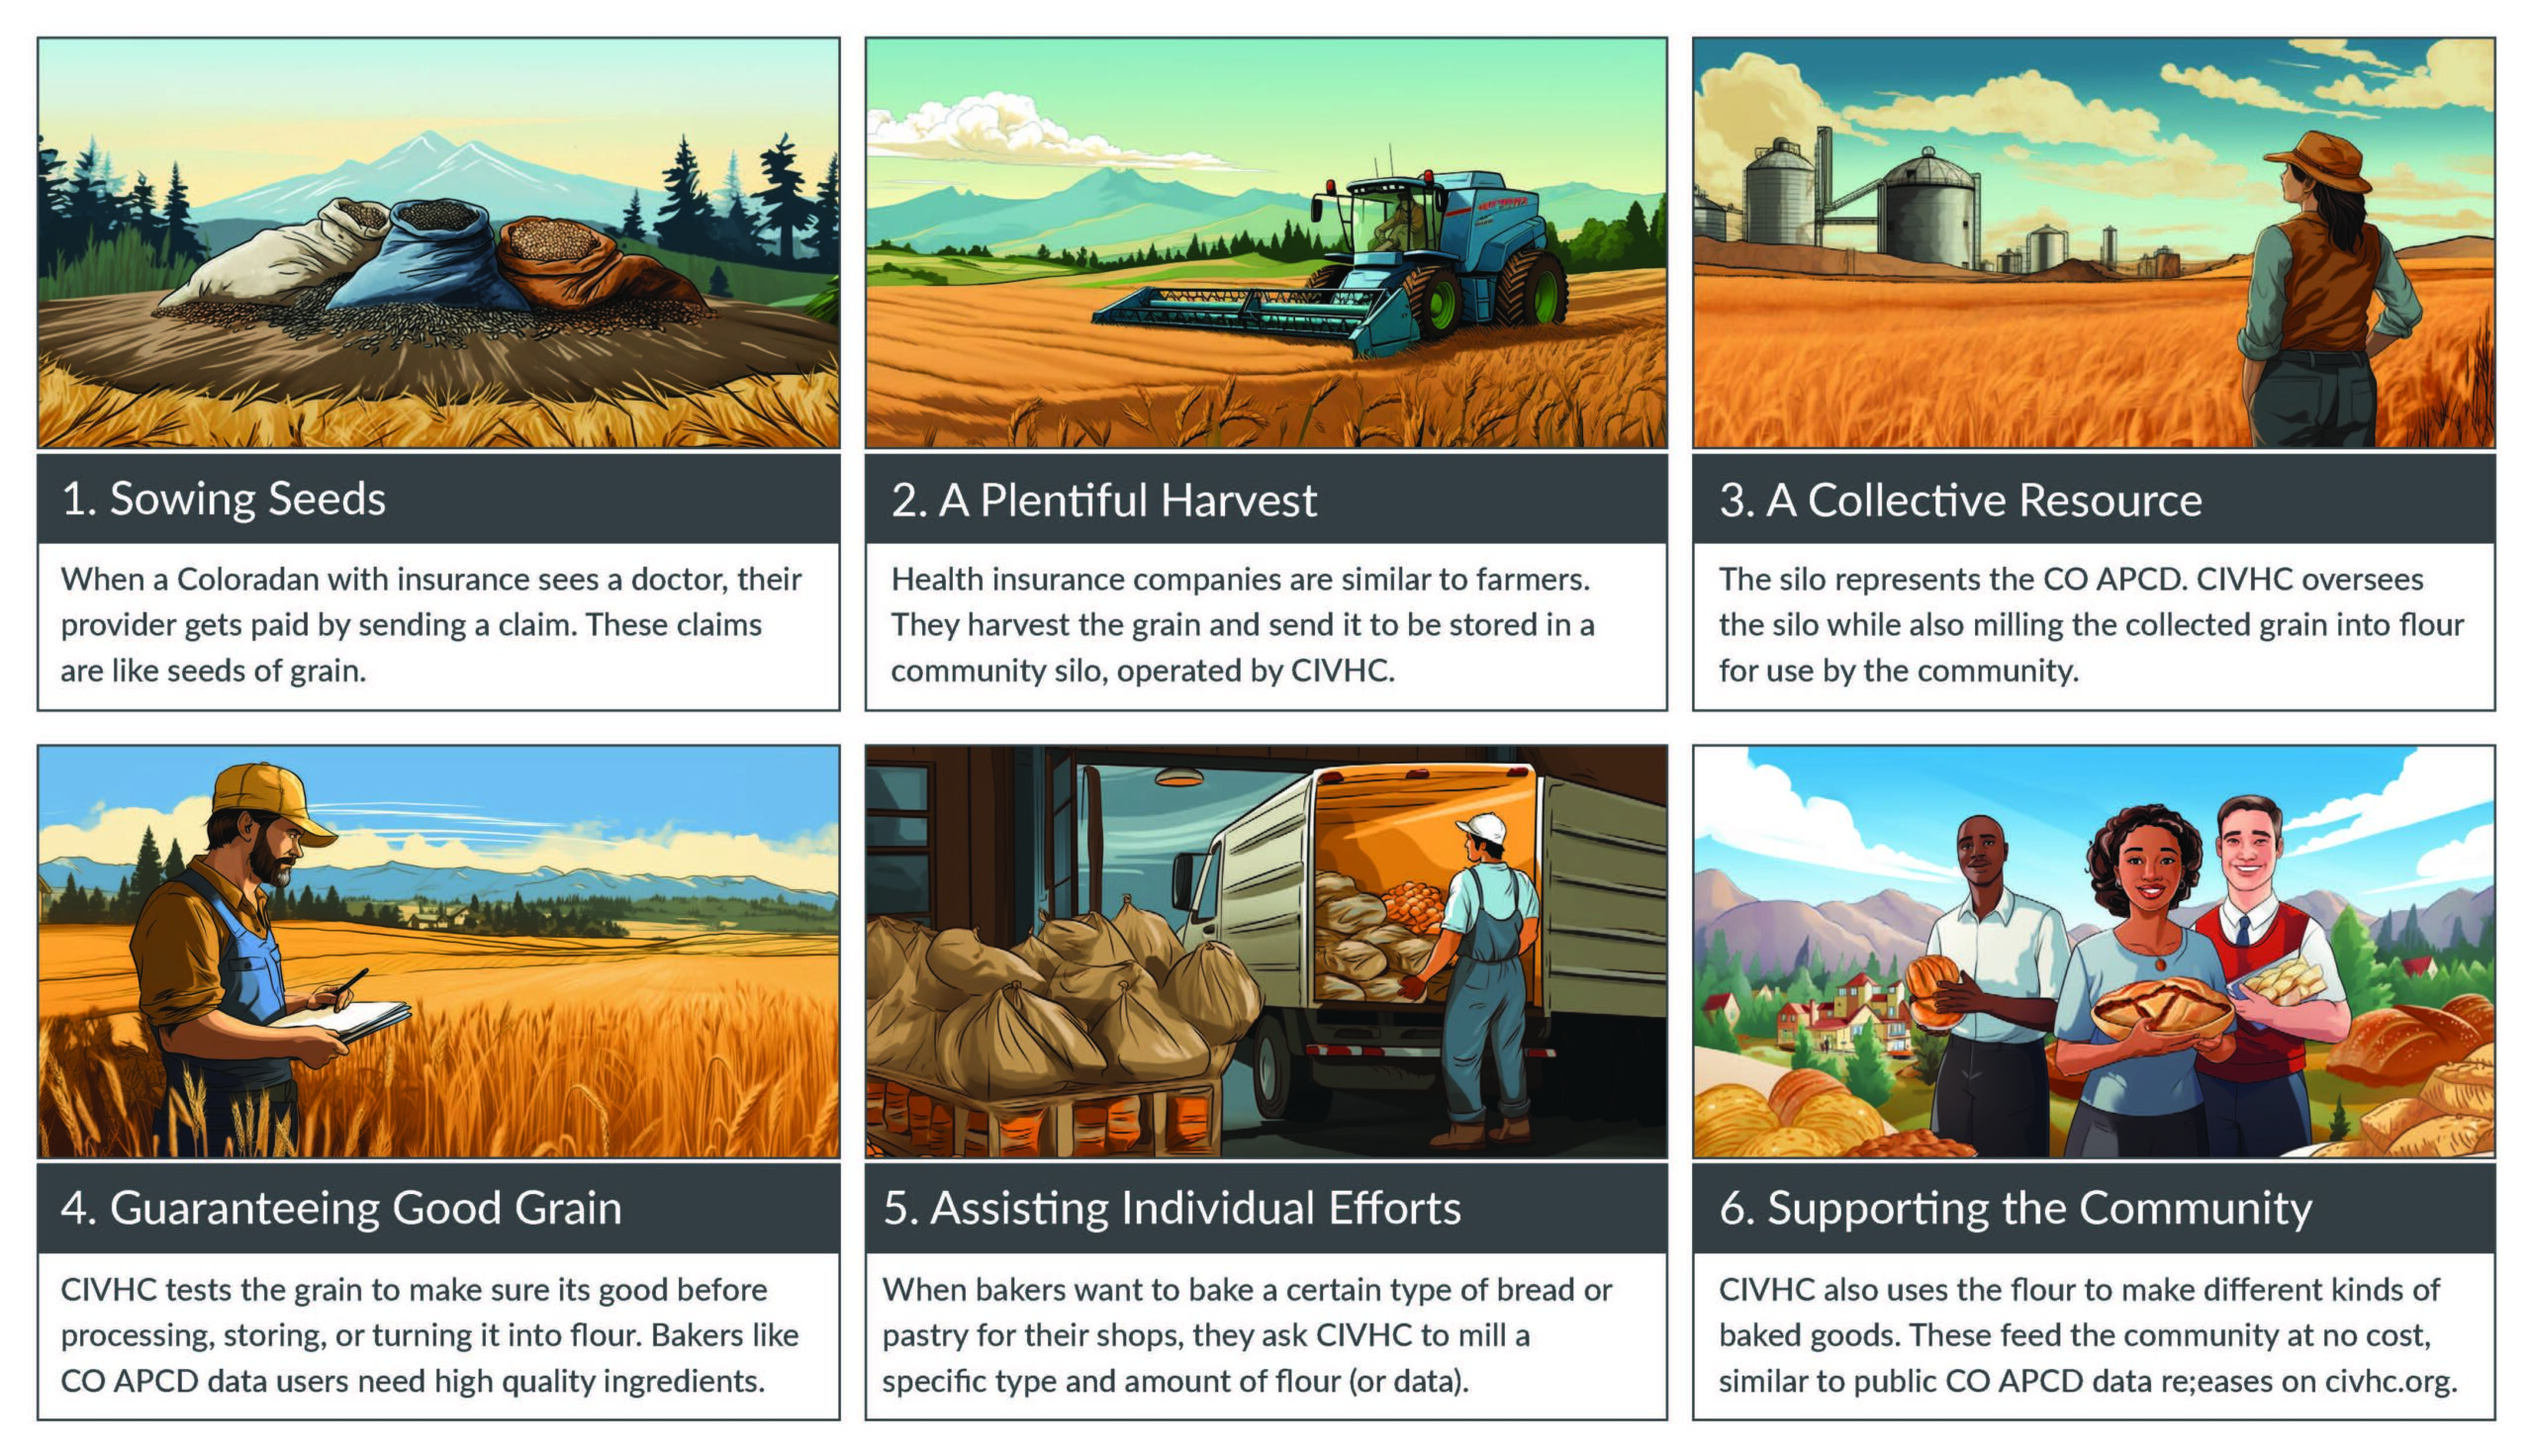 1. Sowing Seeds - When a Coloradan with insurance sees a doctor, their provider gets paid by sending a claim. These claims are like seeds of grain. 2. A Plentiful Harvest - Health insurance companies are similar to farmers. They harvest the grain and send it to be stored in a community silo, operated by CIVHC. 3. A Collective Resource - The silo represents the CO APCD. CIVHC oversees the silo while also milling the collected grain into flower for use by the community. 4. Guaranteeing Good Grain - CIVHC tests the grain to make sure its good before processing, storing, or turning it into flower. Bakers like CO APCD data users need high quality ingredients. 5. Assisting Individual Efforts- When bakers want to bake a certain type of bread or pastry for their shops, they ask CIVHC to mill a specific type and amount of flower (data). 6. Supporting the Community - CIVHC also uses the flour to make different kinds of baked goods. These feed the community at no cost, similar to public CO APCD data releases on CIVHC.org. 